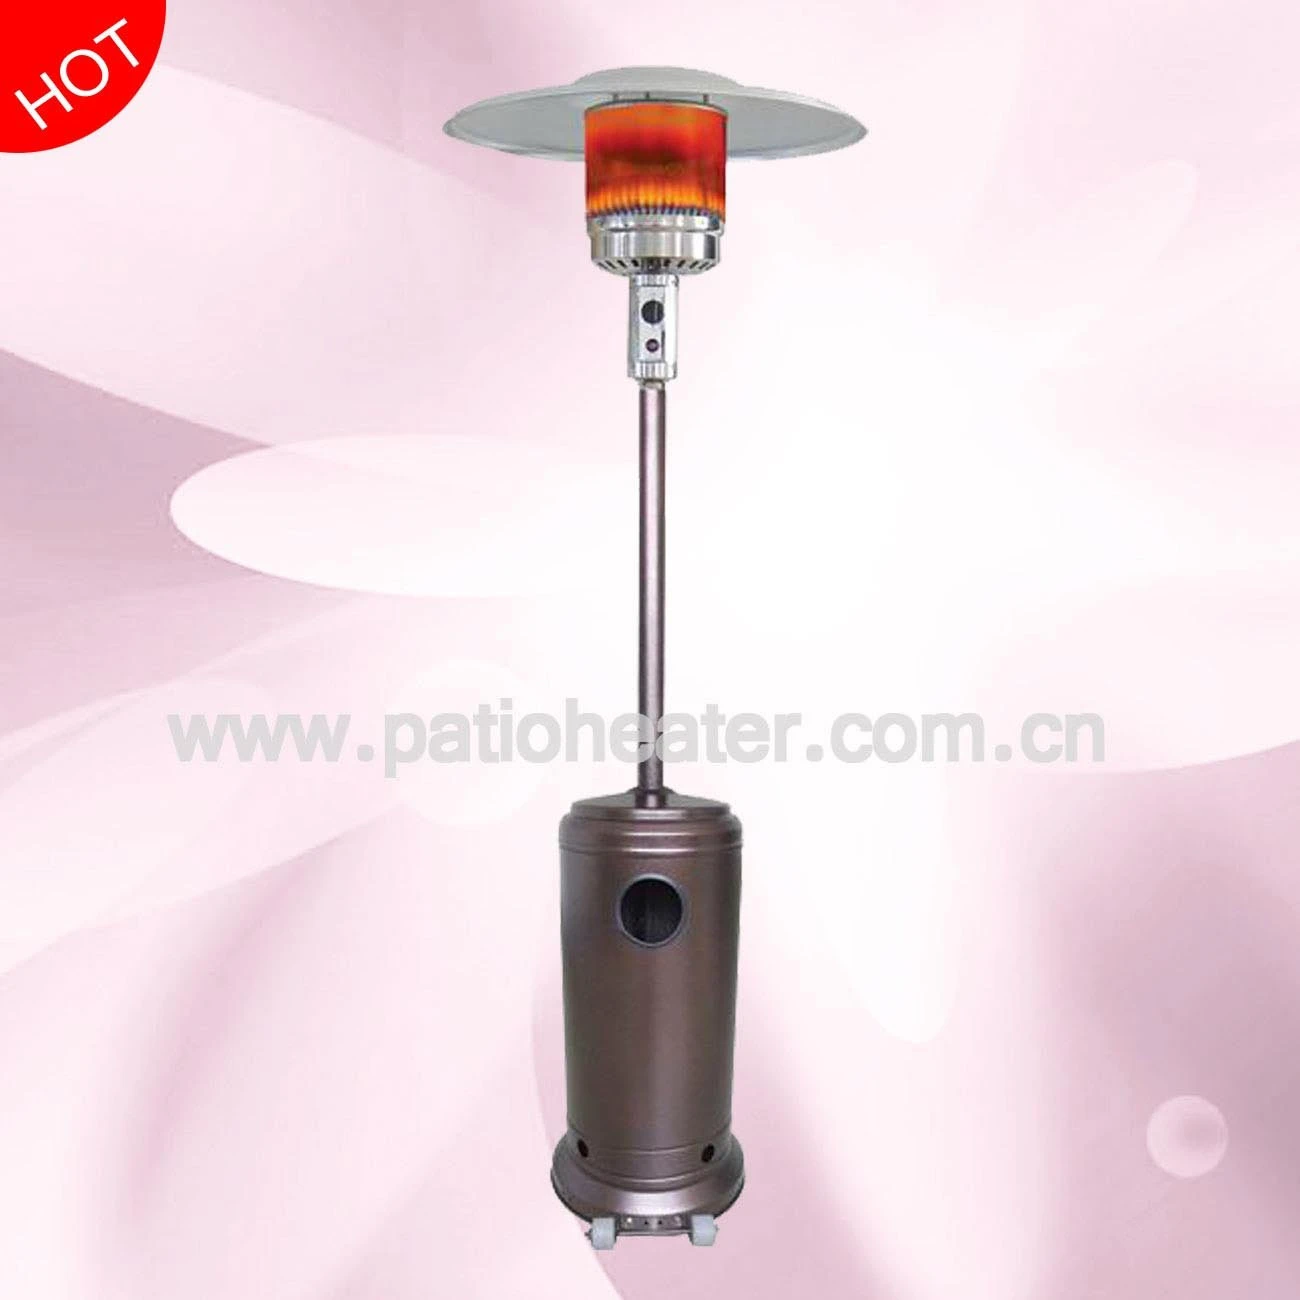 table top patio heater